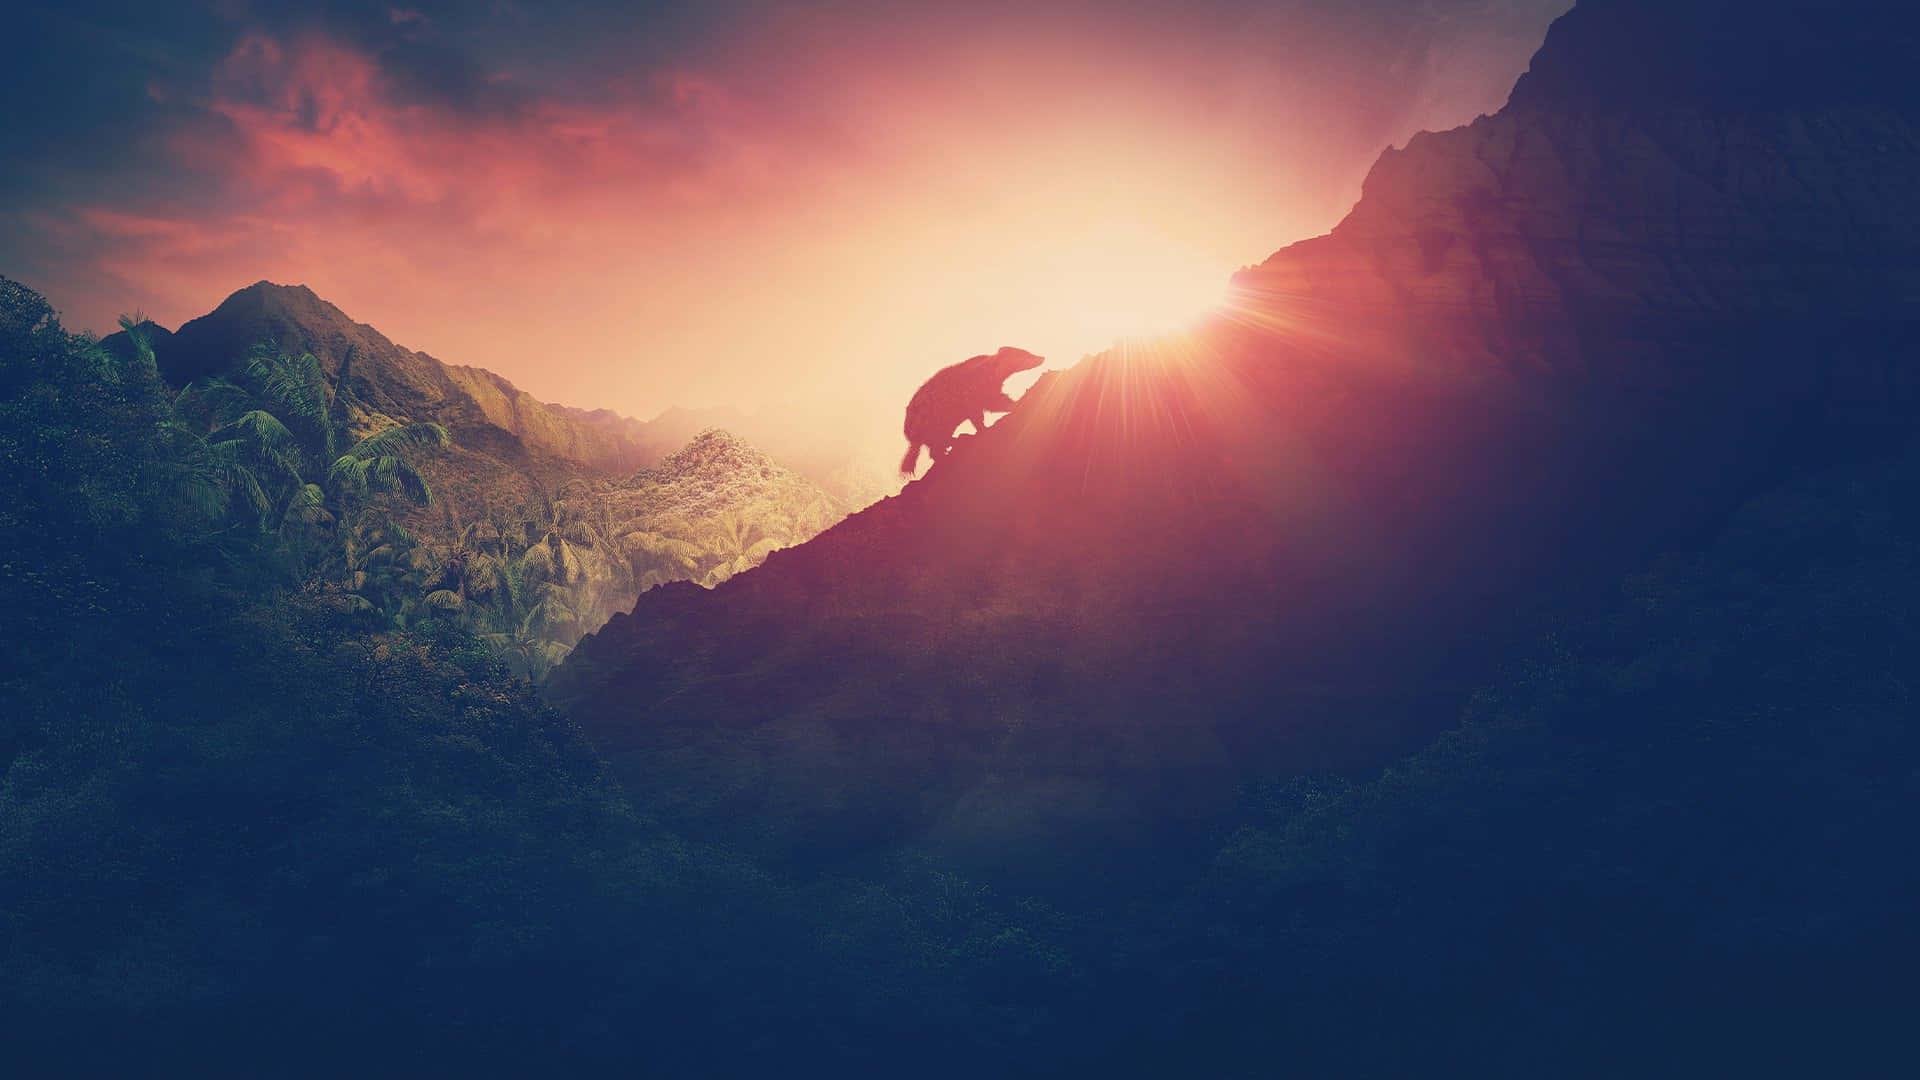 Bear Climbing Against Sunset Nature Picture